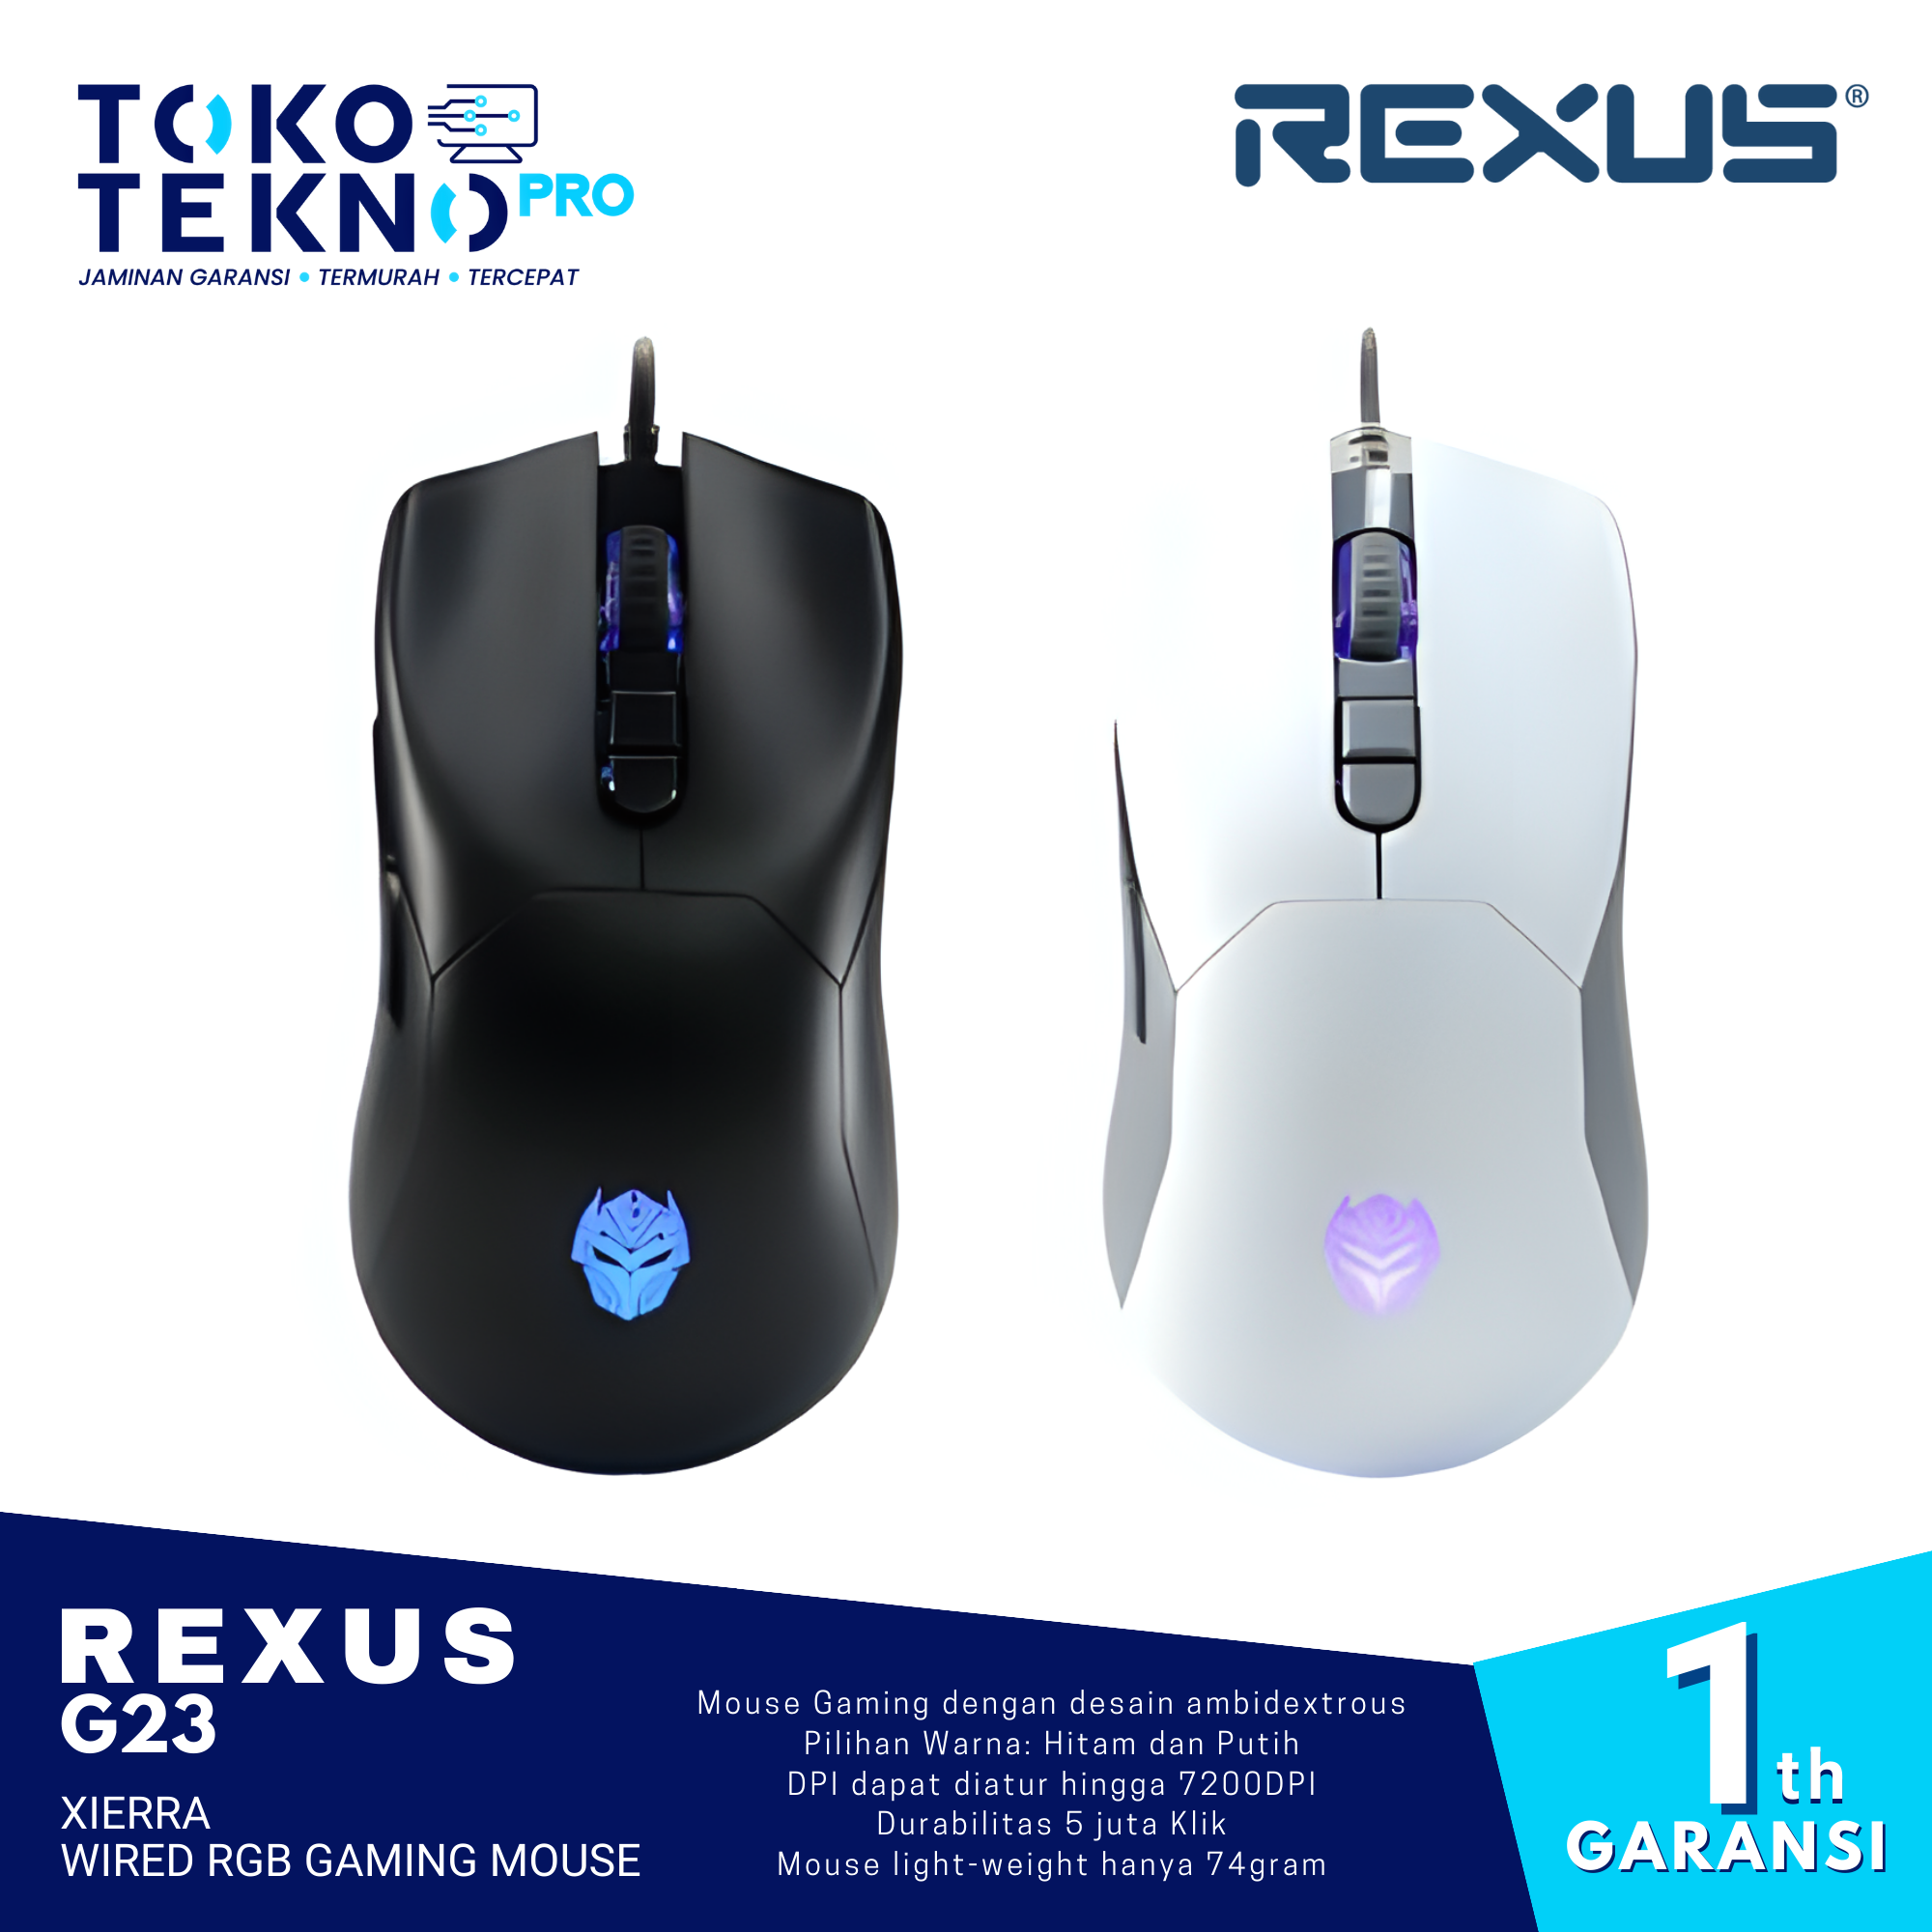 Rexus G23 Xierra Wired RGB Gaming Mouse